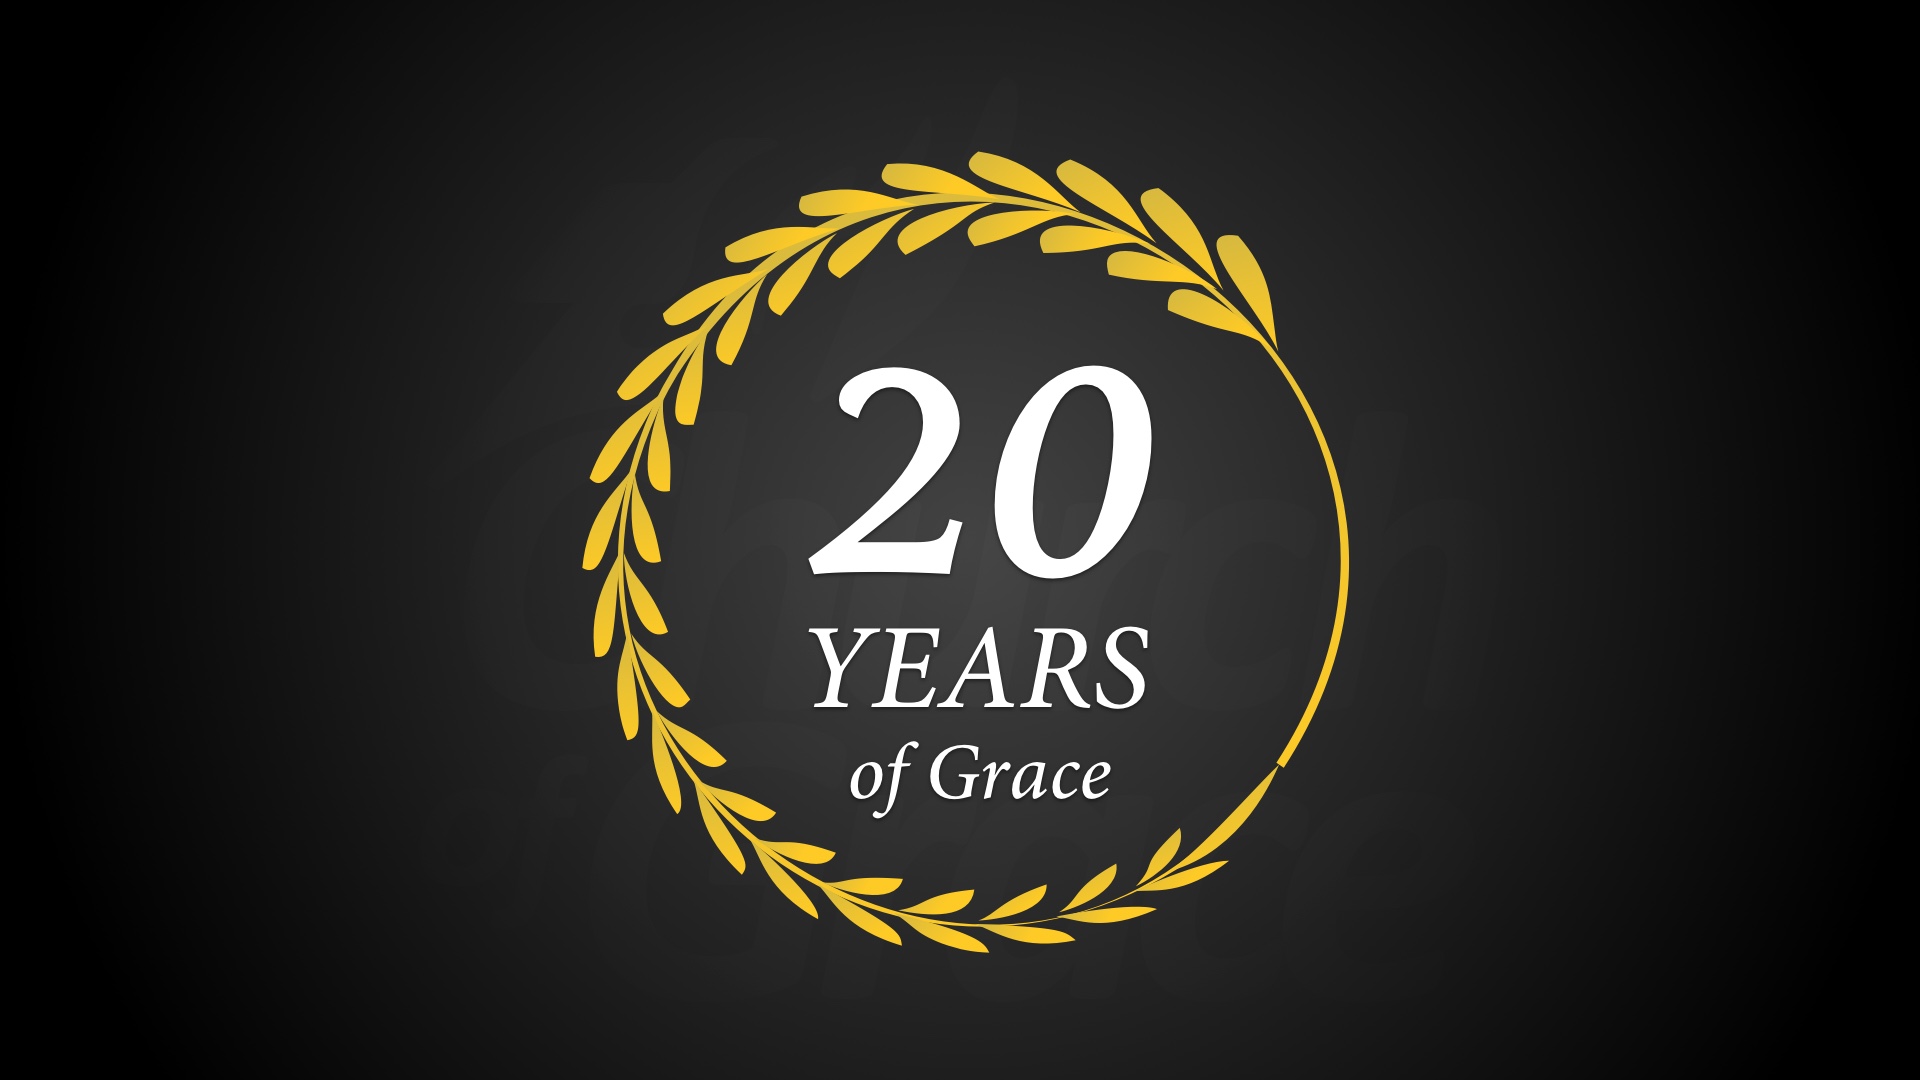 20 Years of Grace